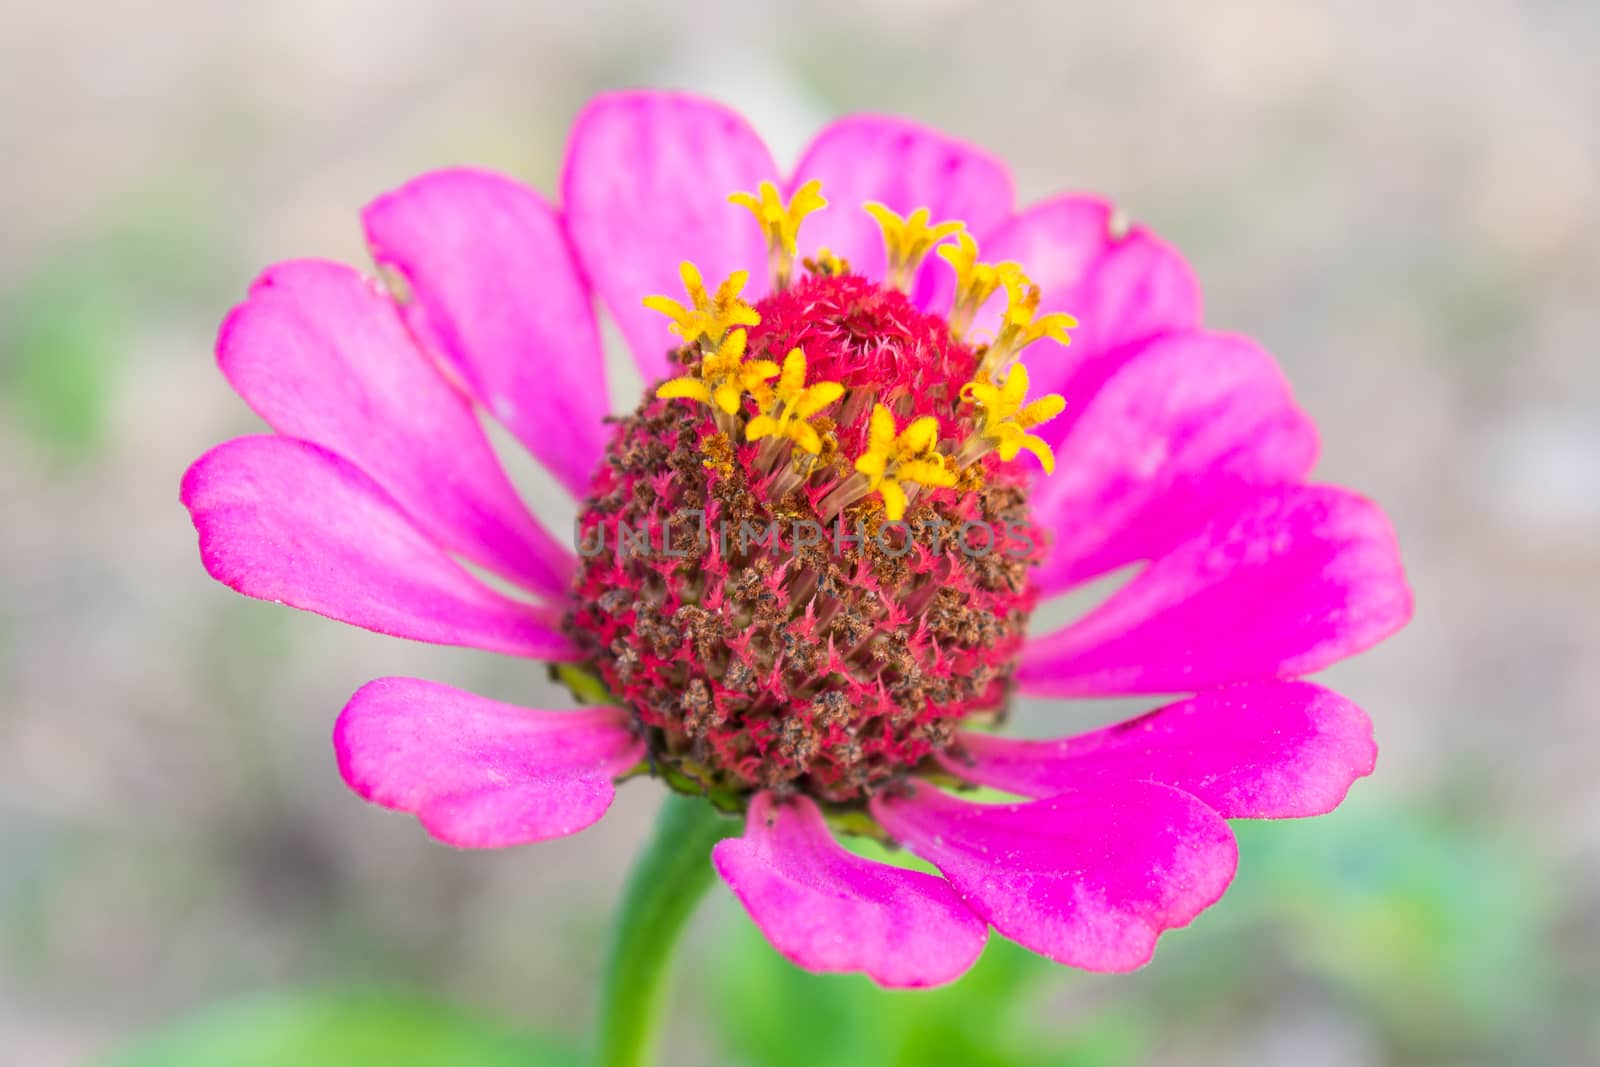 Pink zinnia blossom at center closeup. Zinnia bloom in garden on green leaf background.